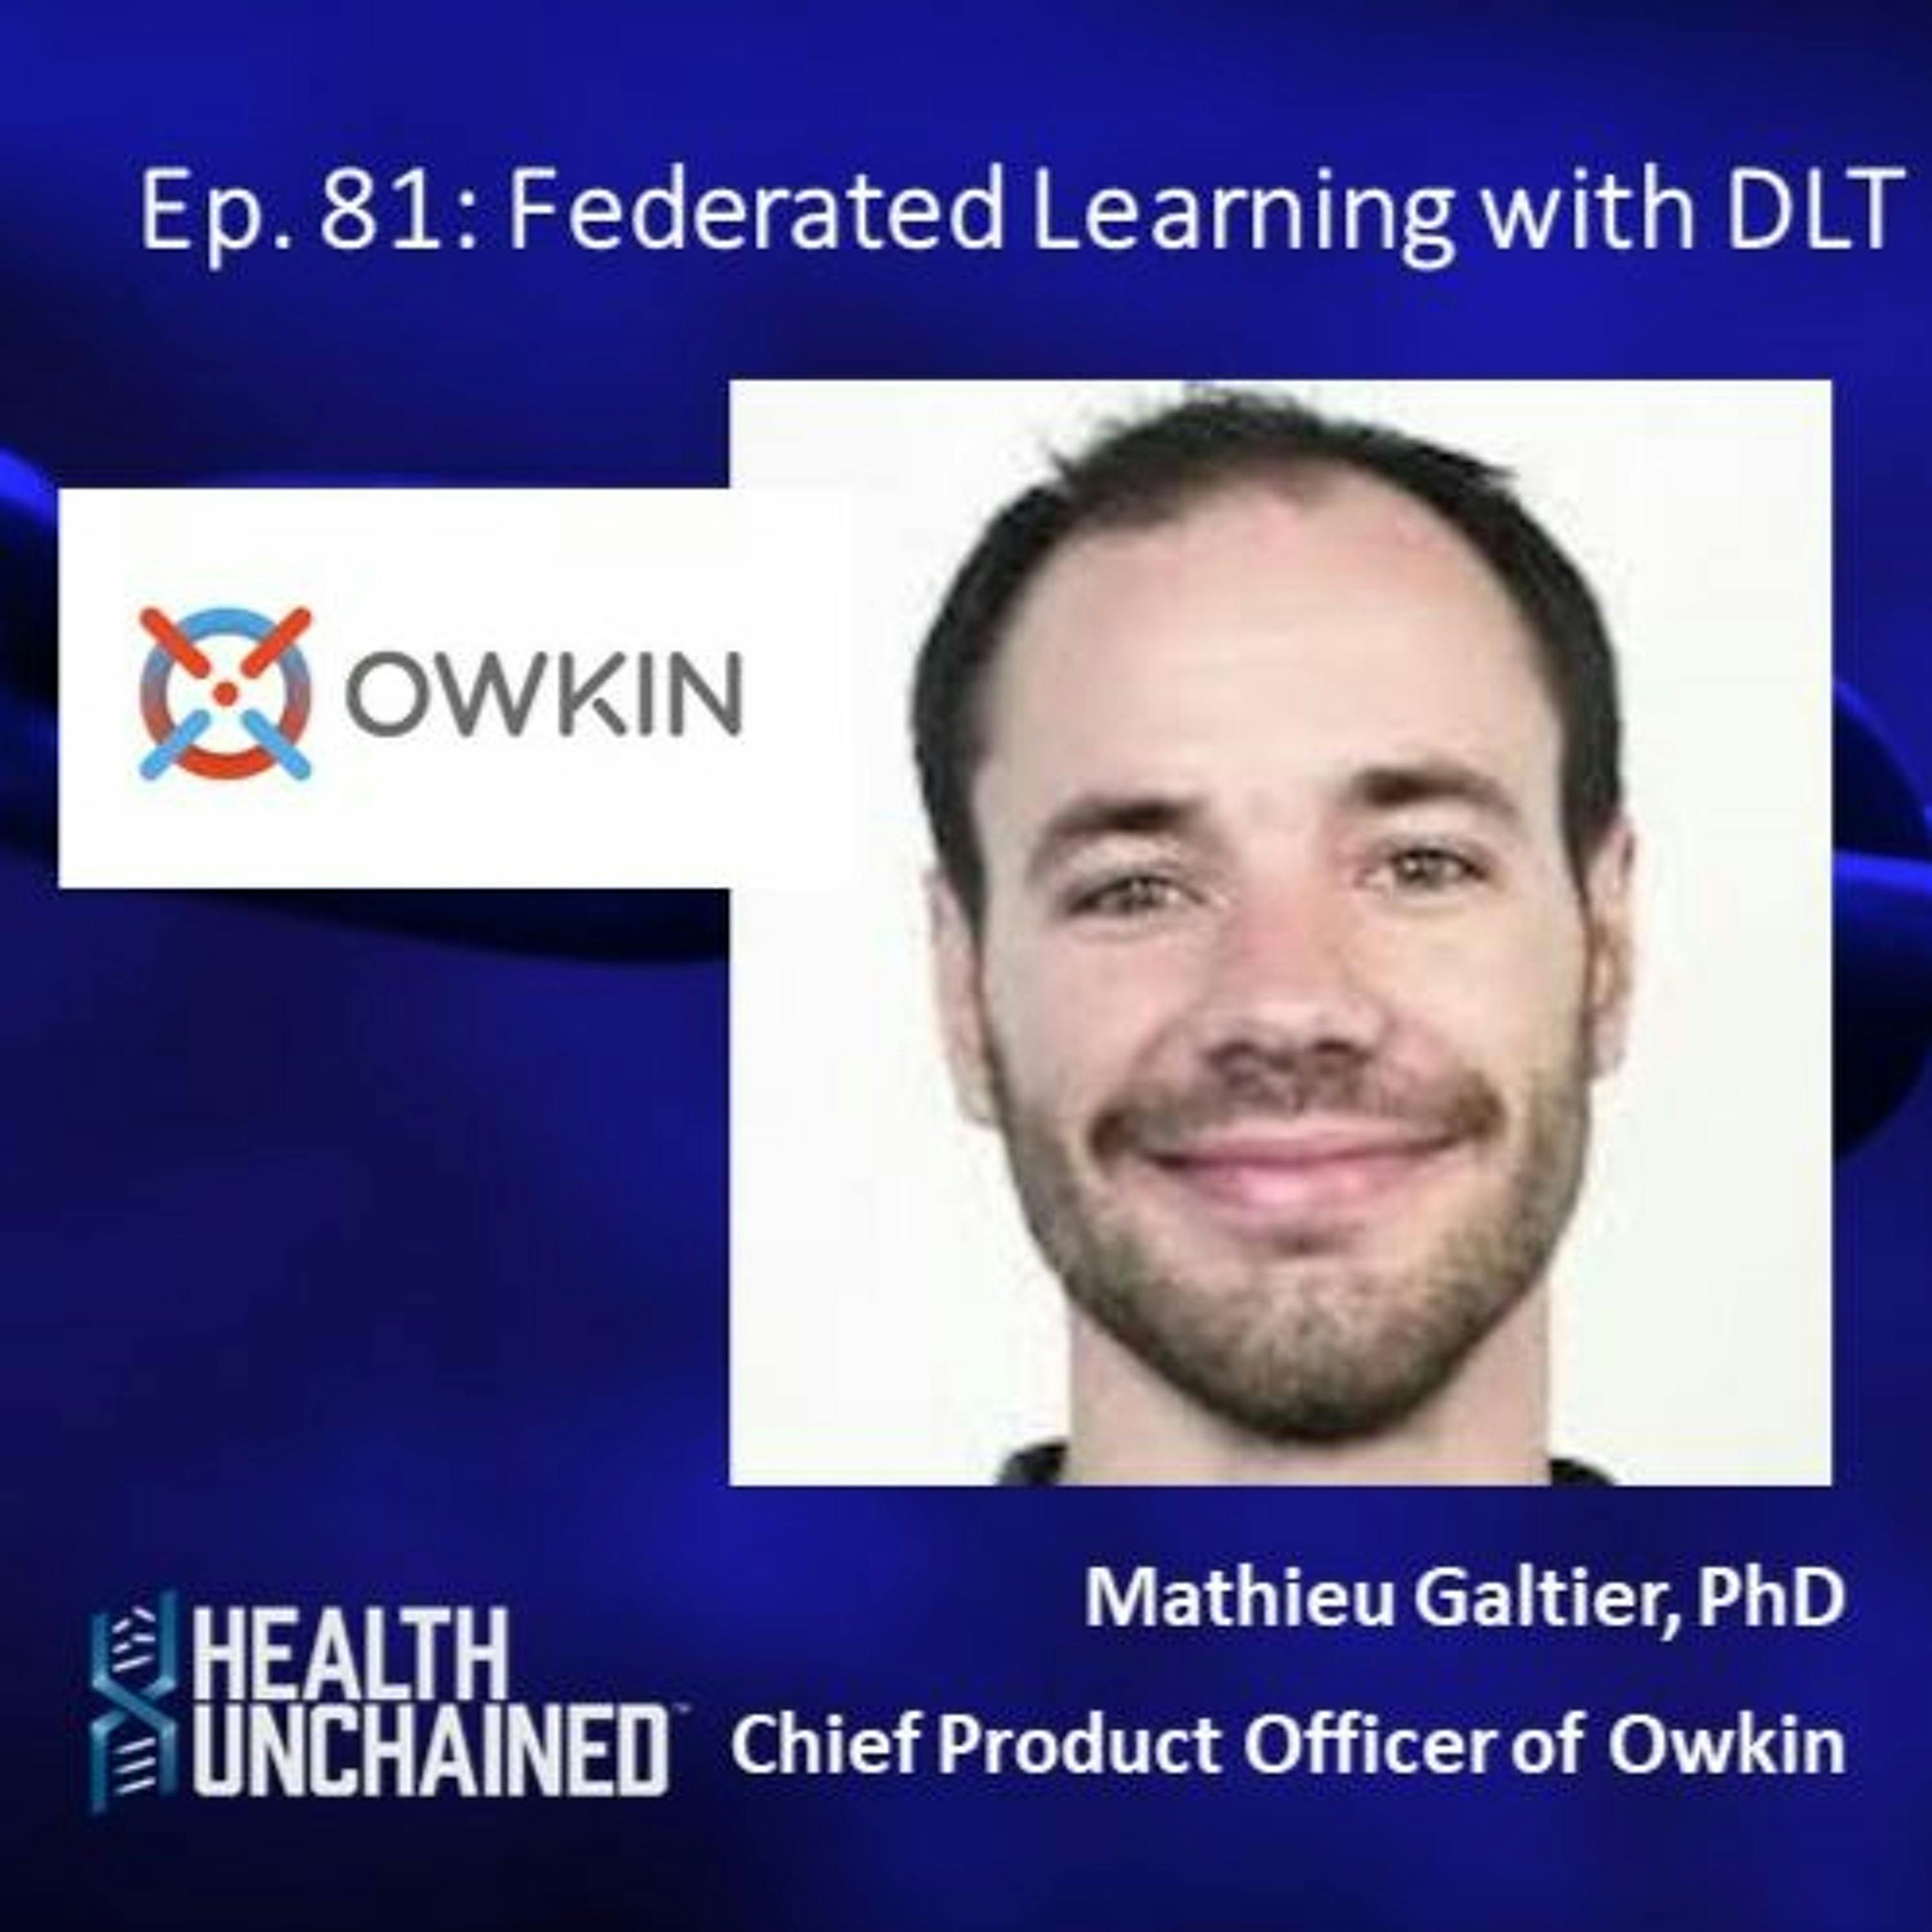 Ep. 81: Federated Learning with DLT – Mathieu Galtier (CPO Owkin)